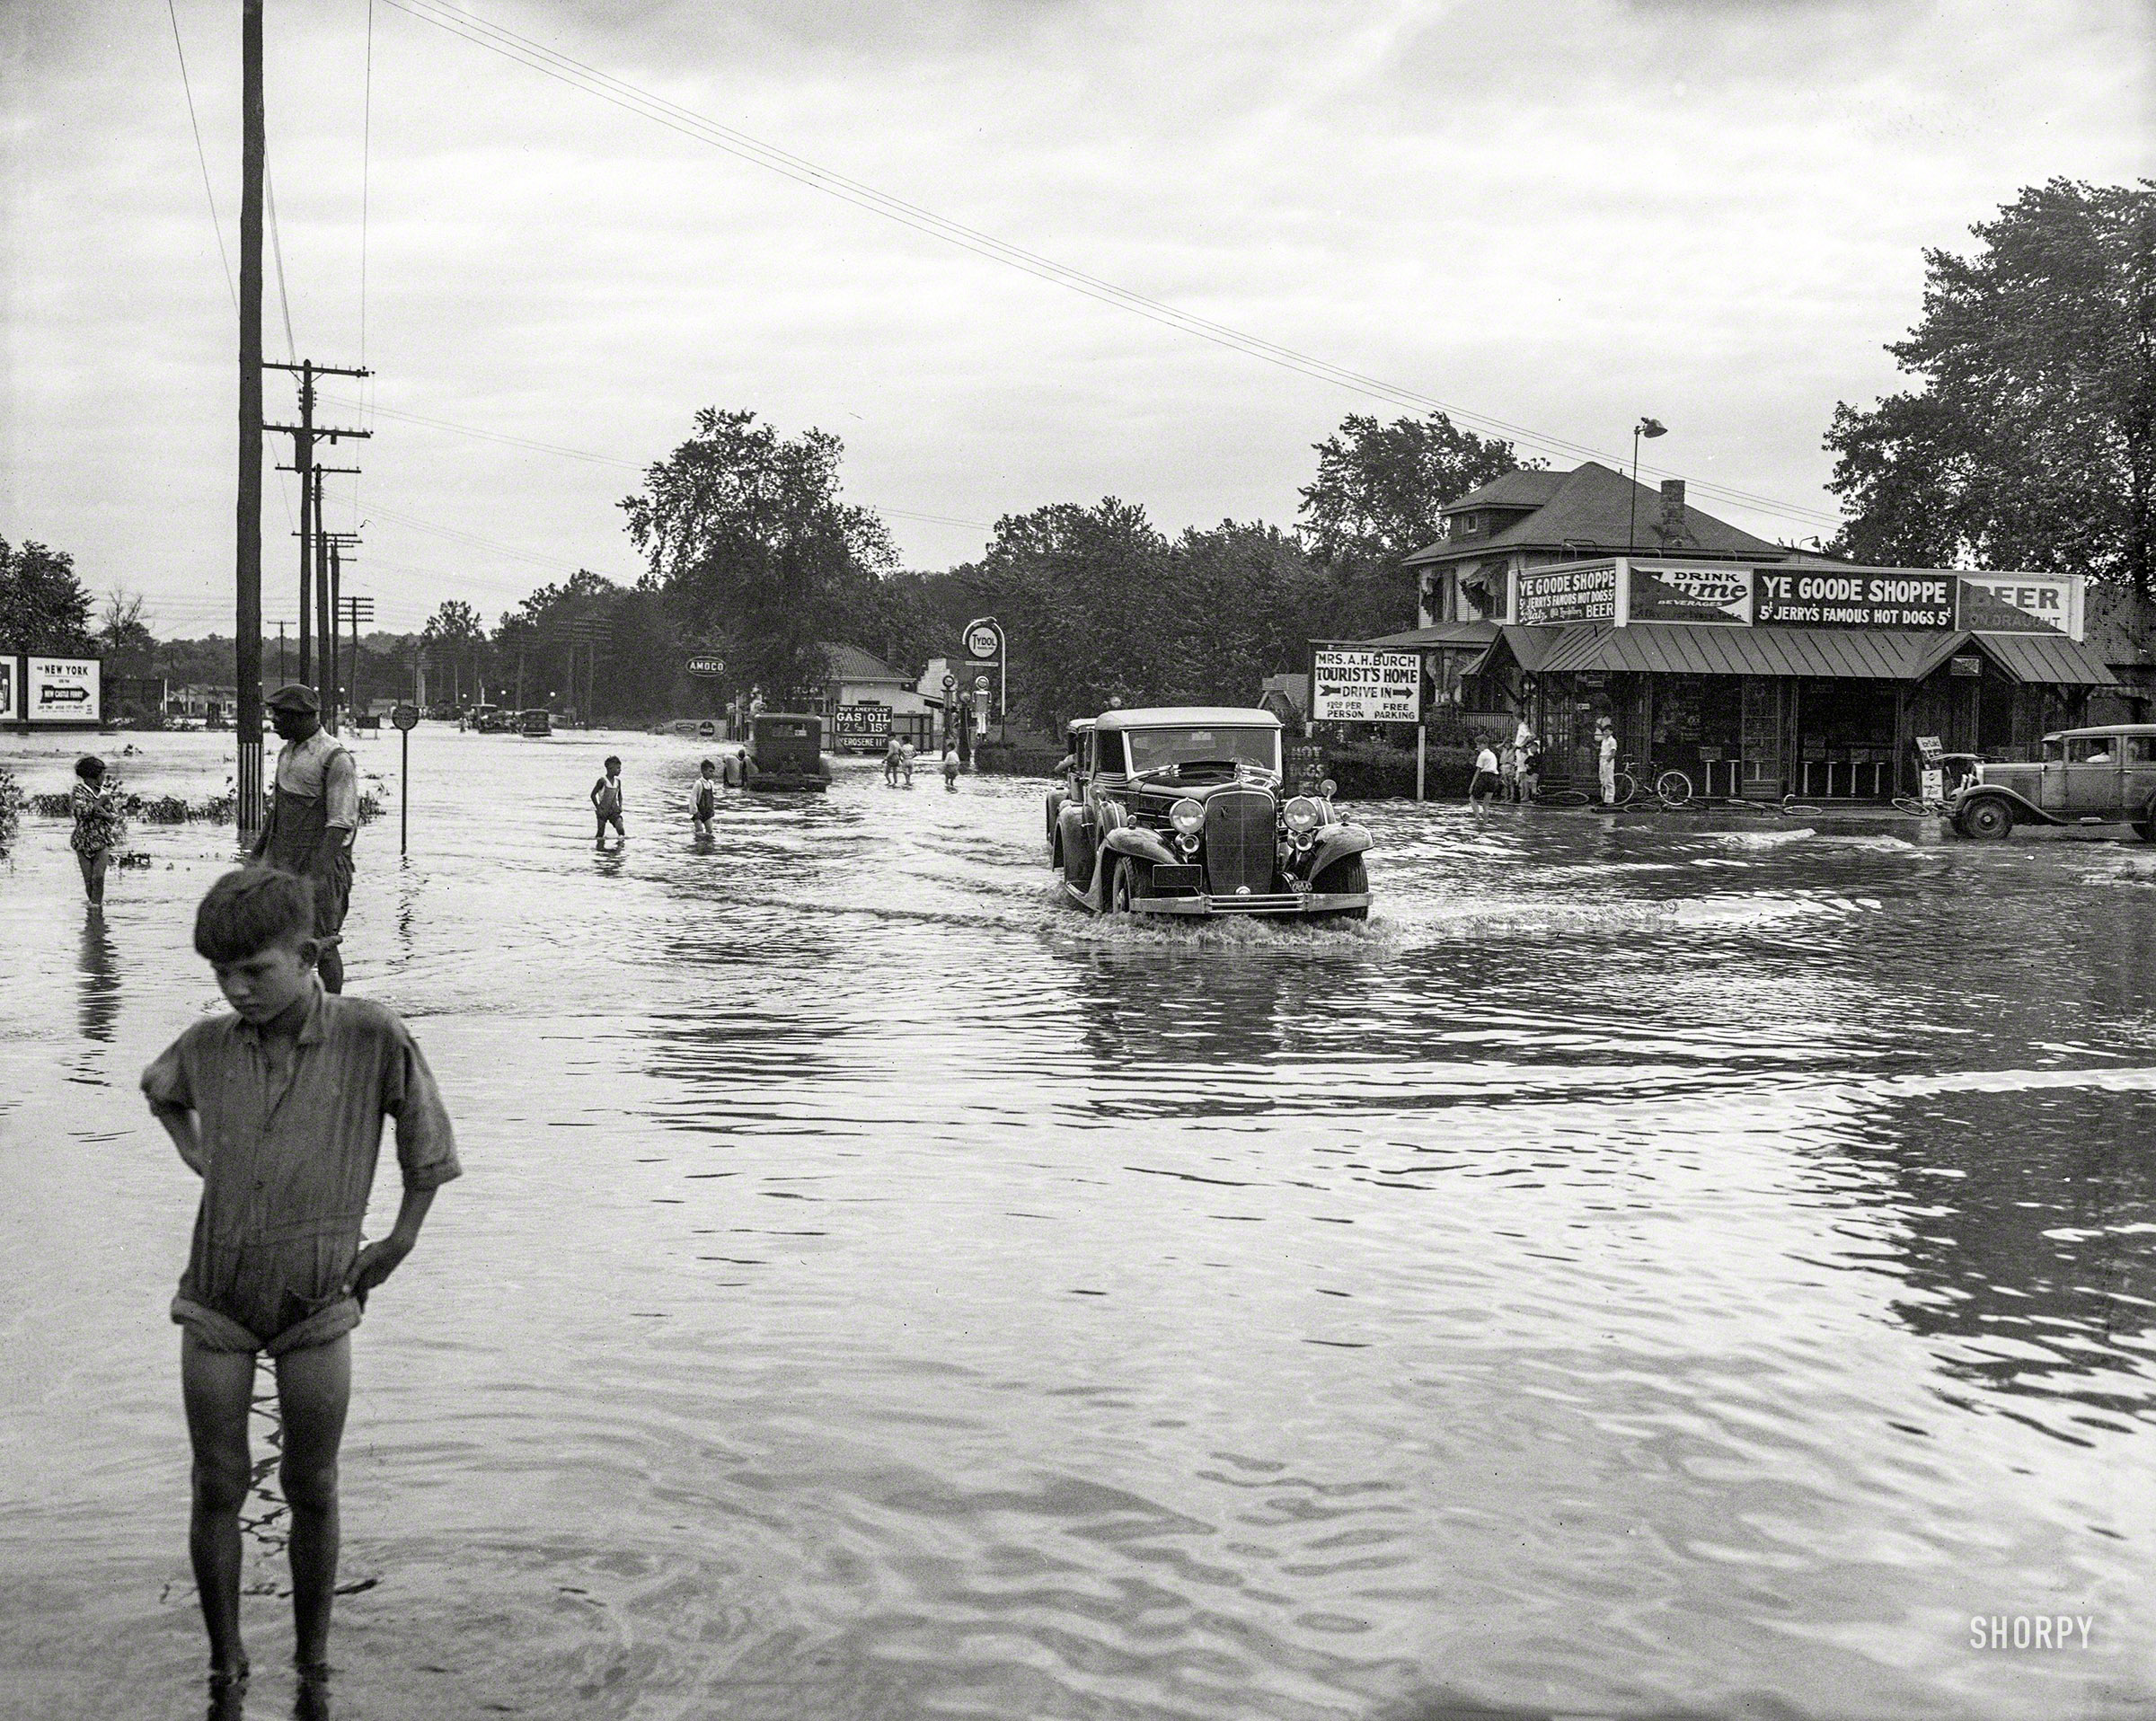 Washington, D.C., or vicinity. "Flooding." Aftermath of the "Chesapeake-Potomac" hurricane of August 1933, which led to the train wreck seen here a few days ago. Who can locate this water-logged crossroads, with "Goode Shoppe" hot dogs going for a nickel? Harris & Ewing glass negative. View full size.